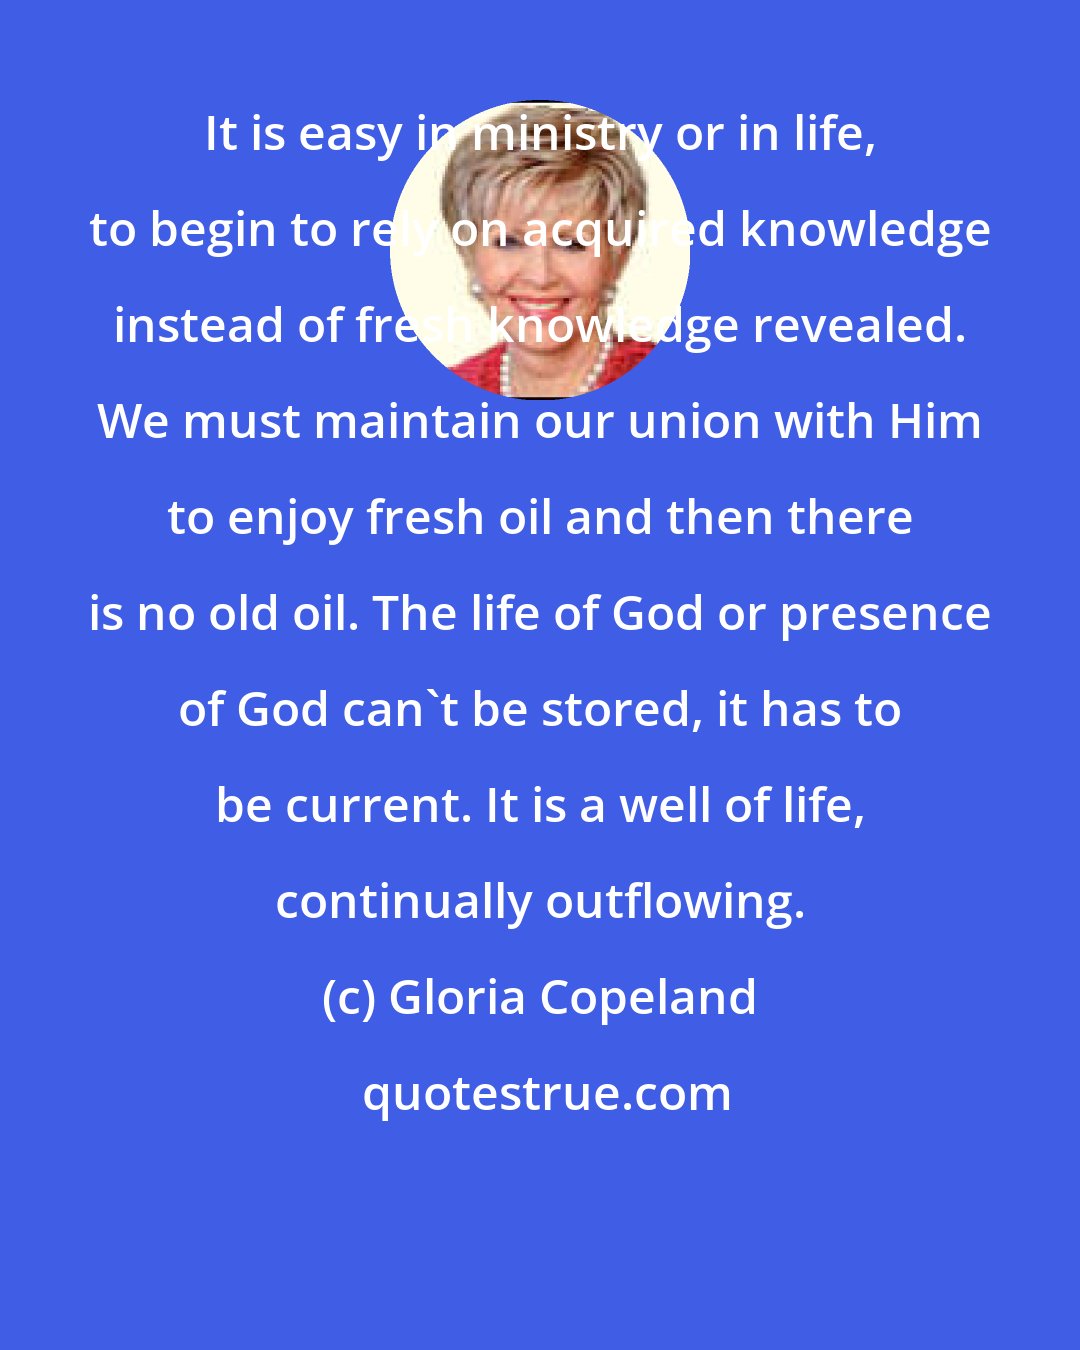 Gloria Copeland: It is easy in ministry or in life, to begin to rely on acquired knowledge instead of fresh knowledge revealed. We must maintain our union with Him to enjoy fresh oil and then there is no old oil. The life of God or presence of God can't be stored, it has to be current. It is a well of life, continually outflowing.